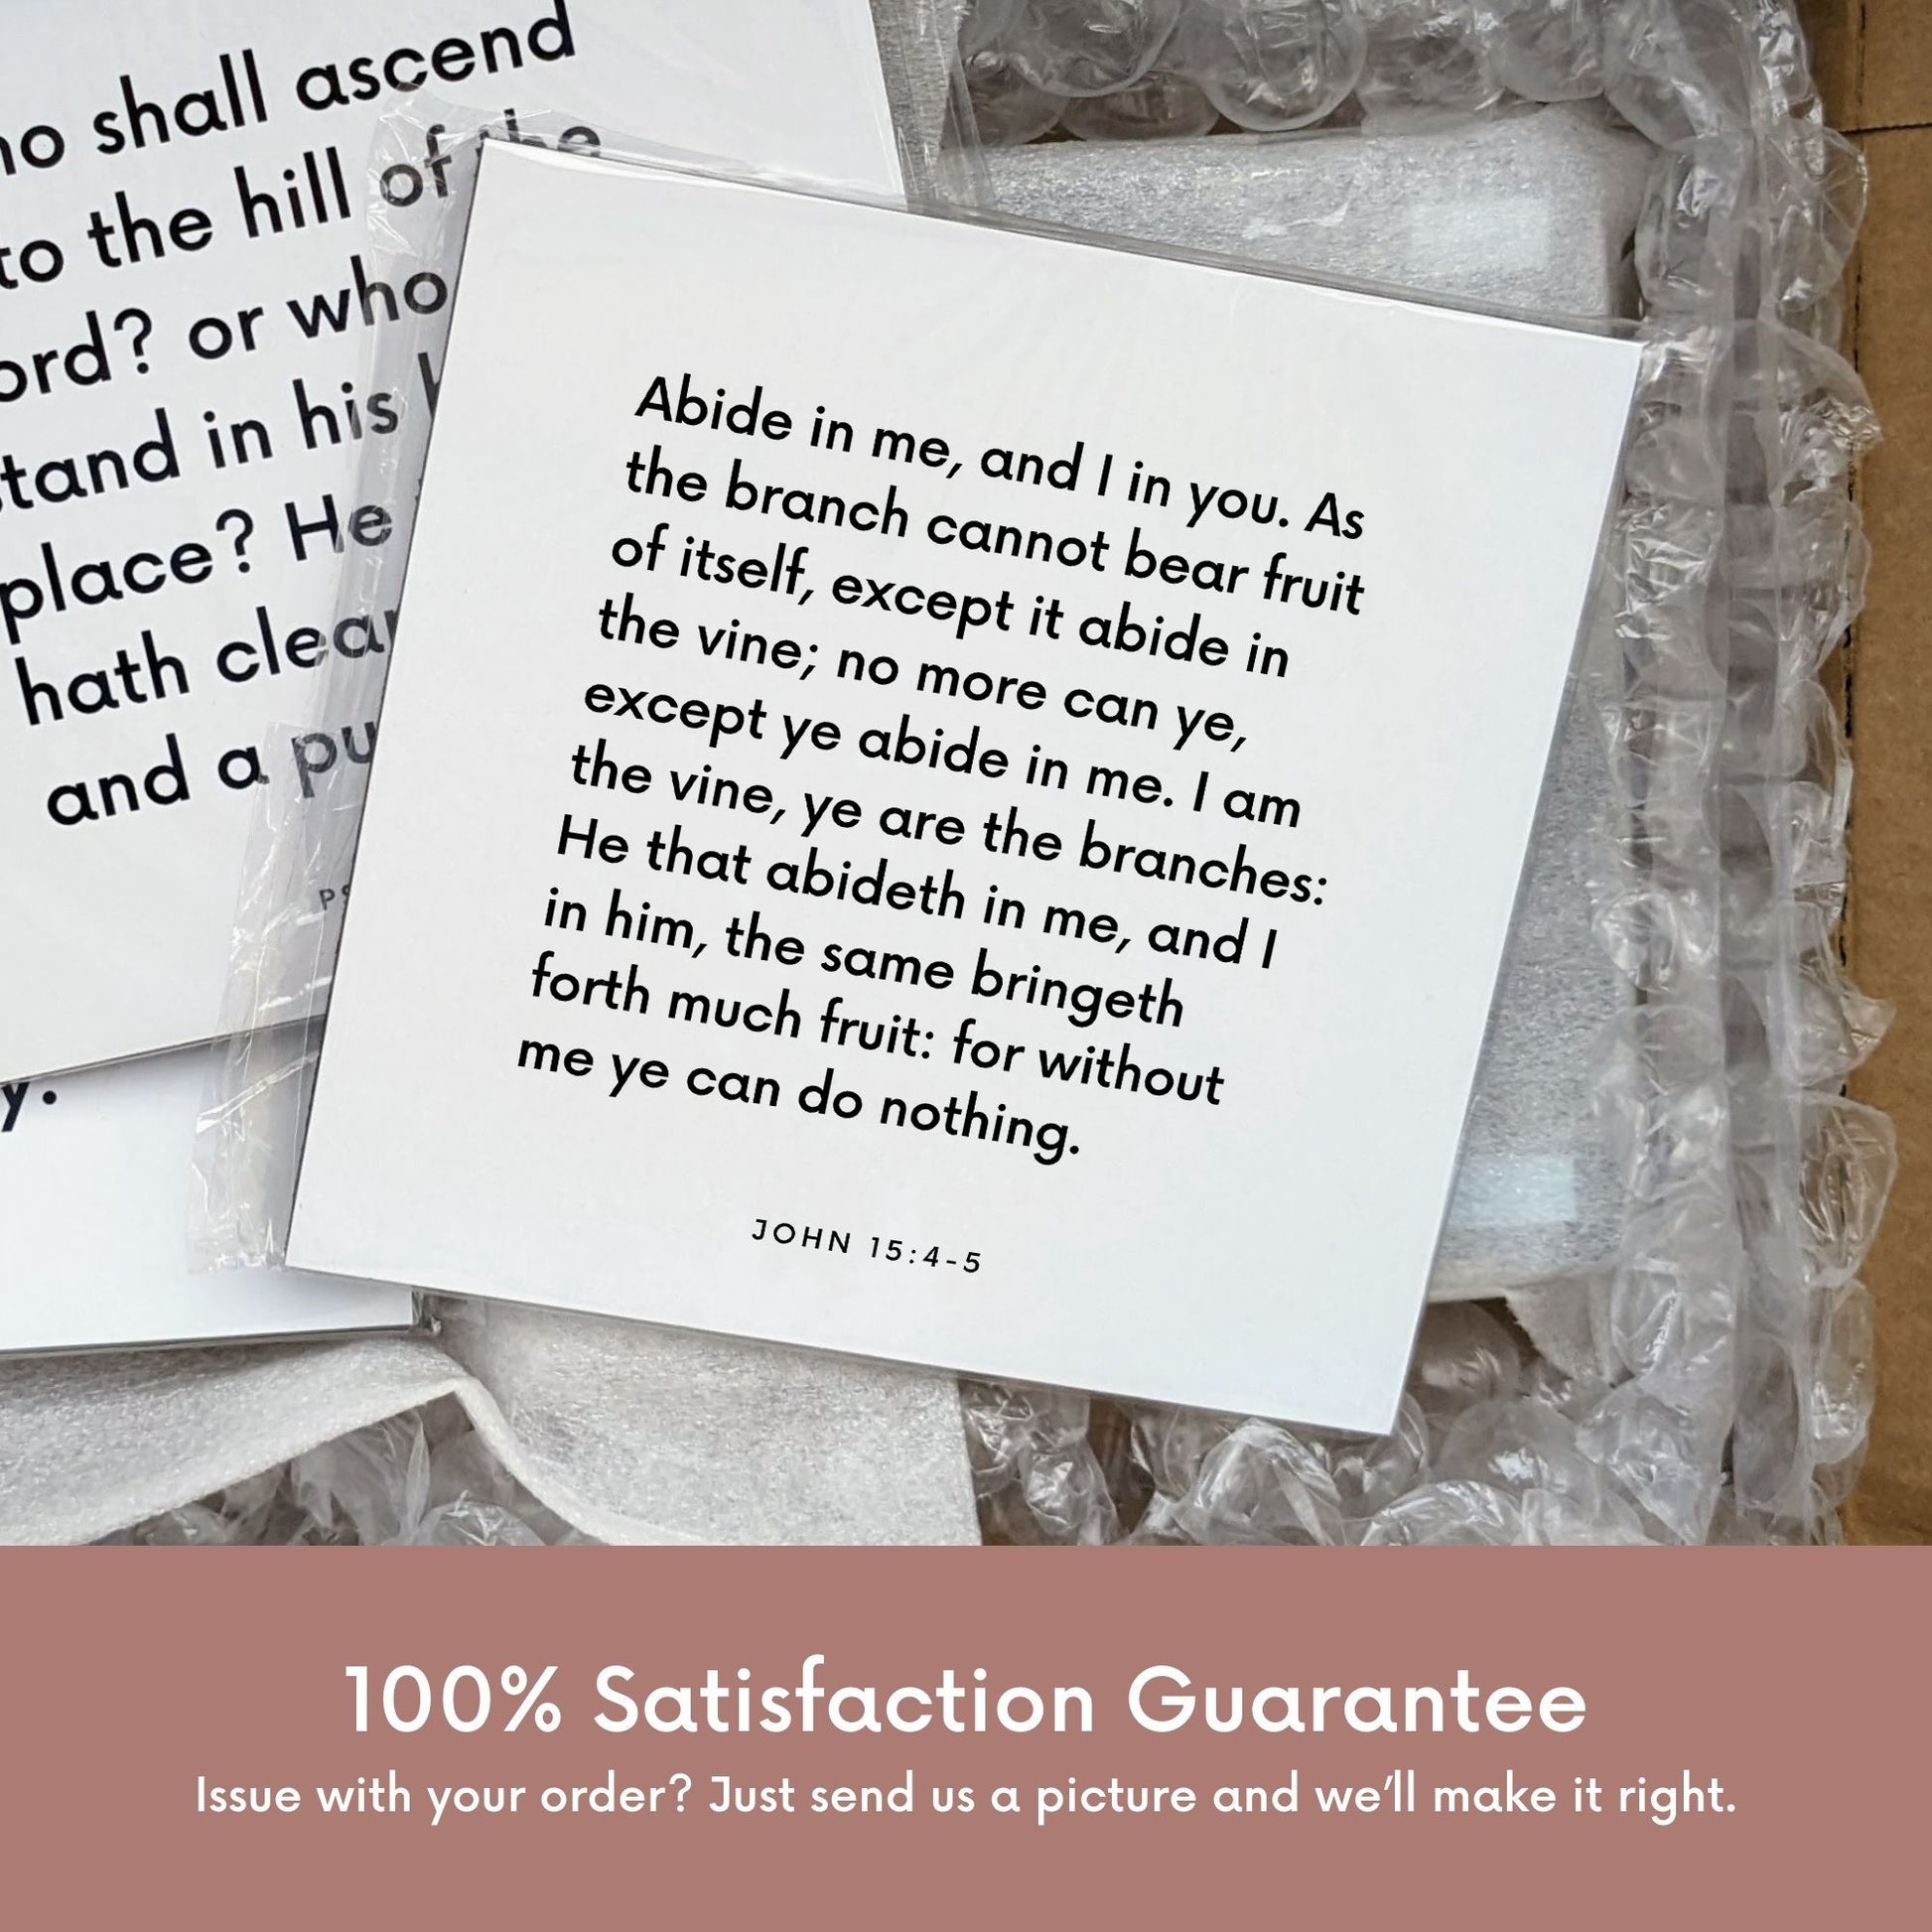 Shipping materials for scripture tile of John 15:4-5 - "Abide in me, and I in you"